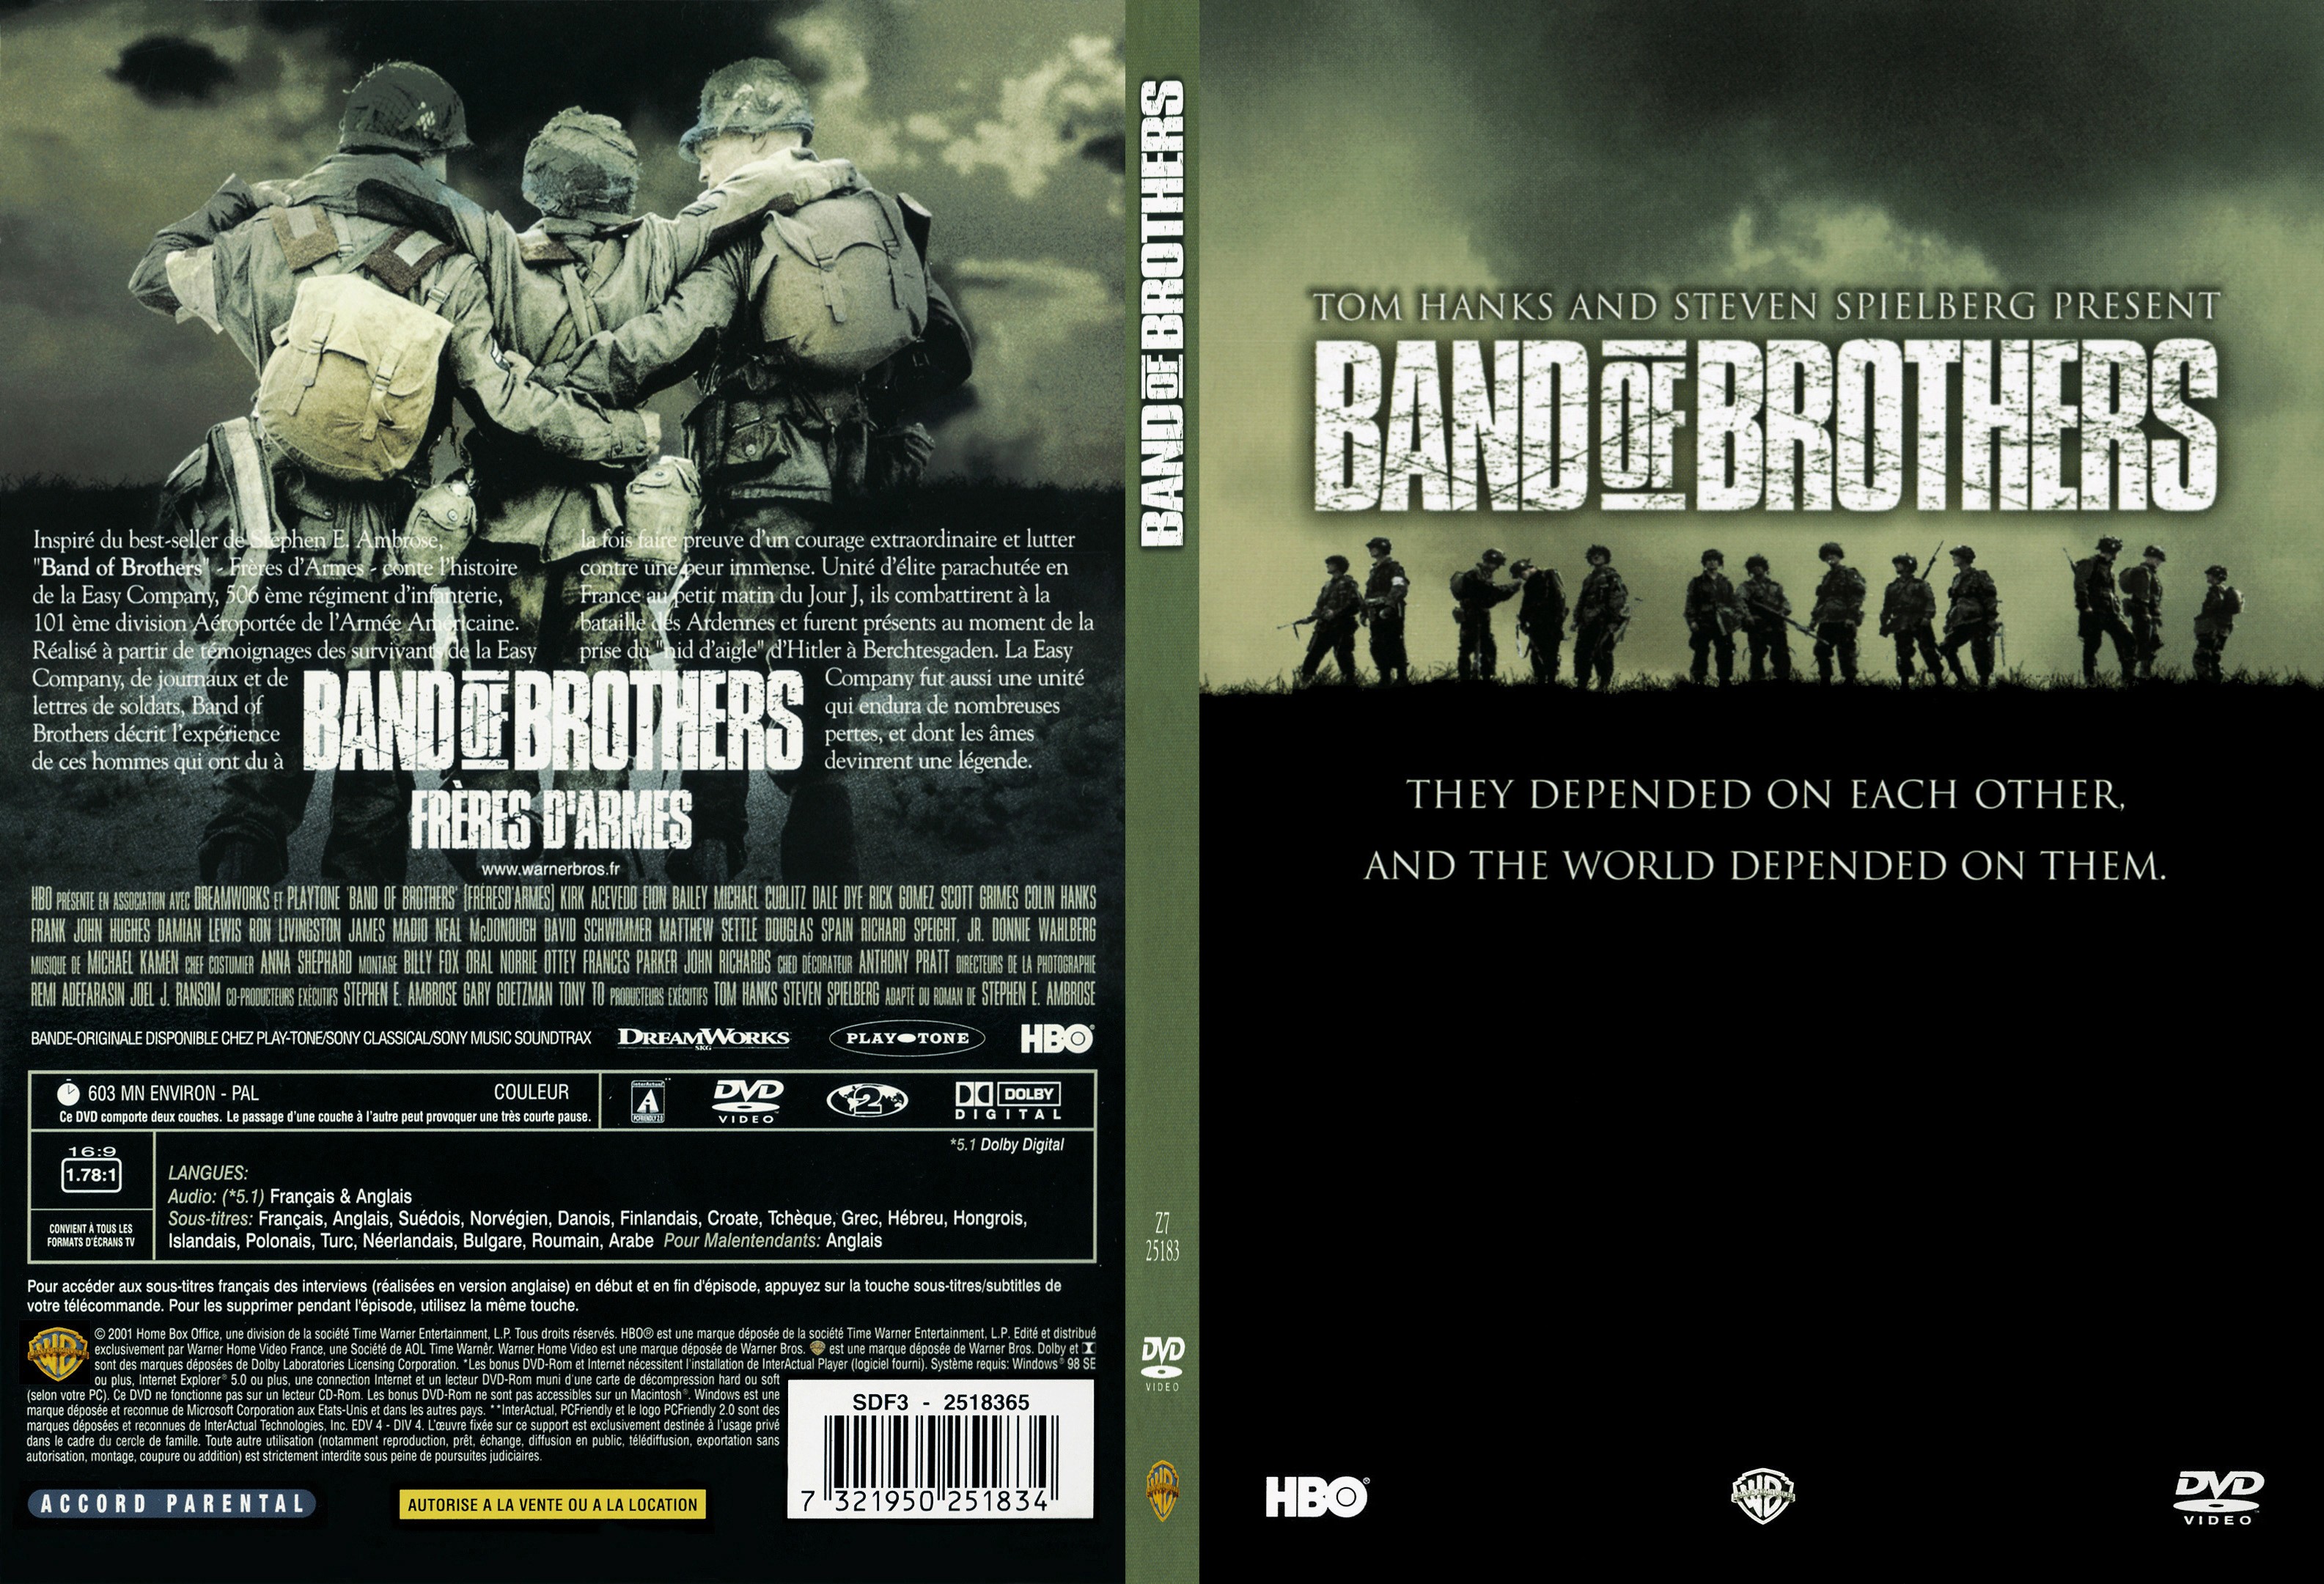 Jaquette DVD Band of Brothers - SLIM